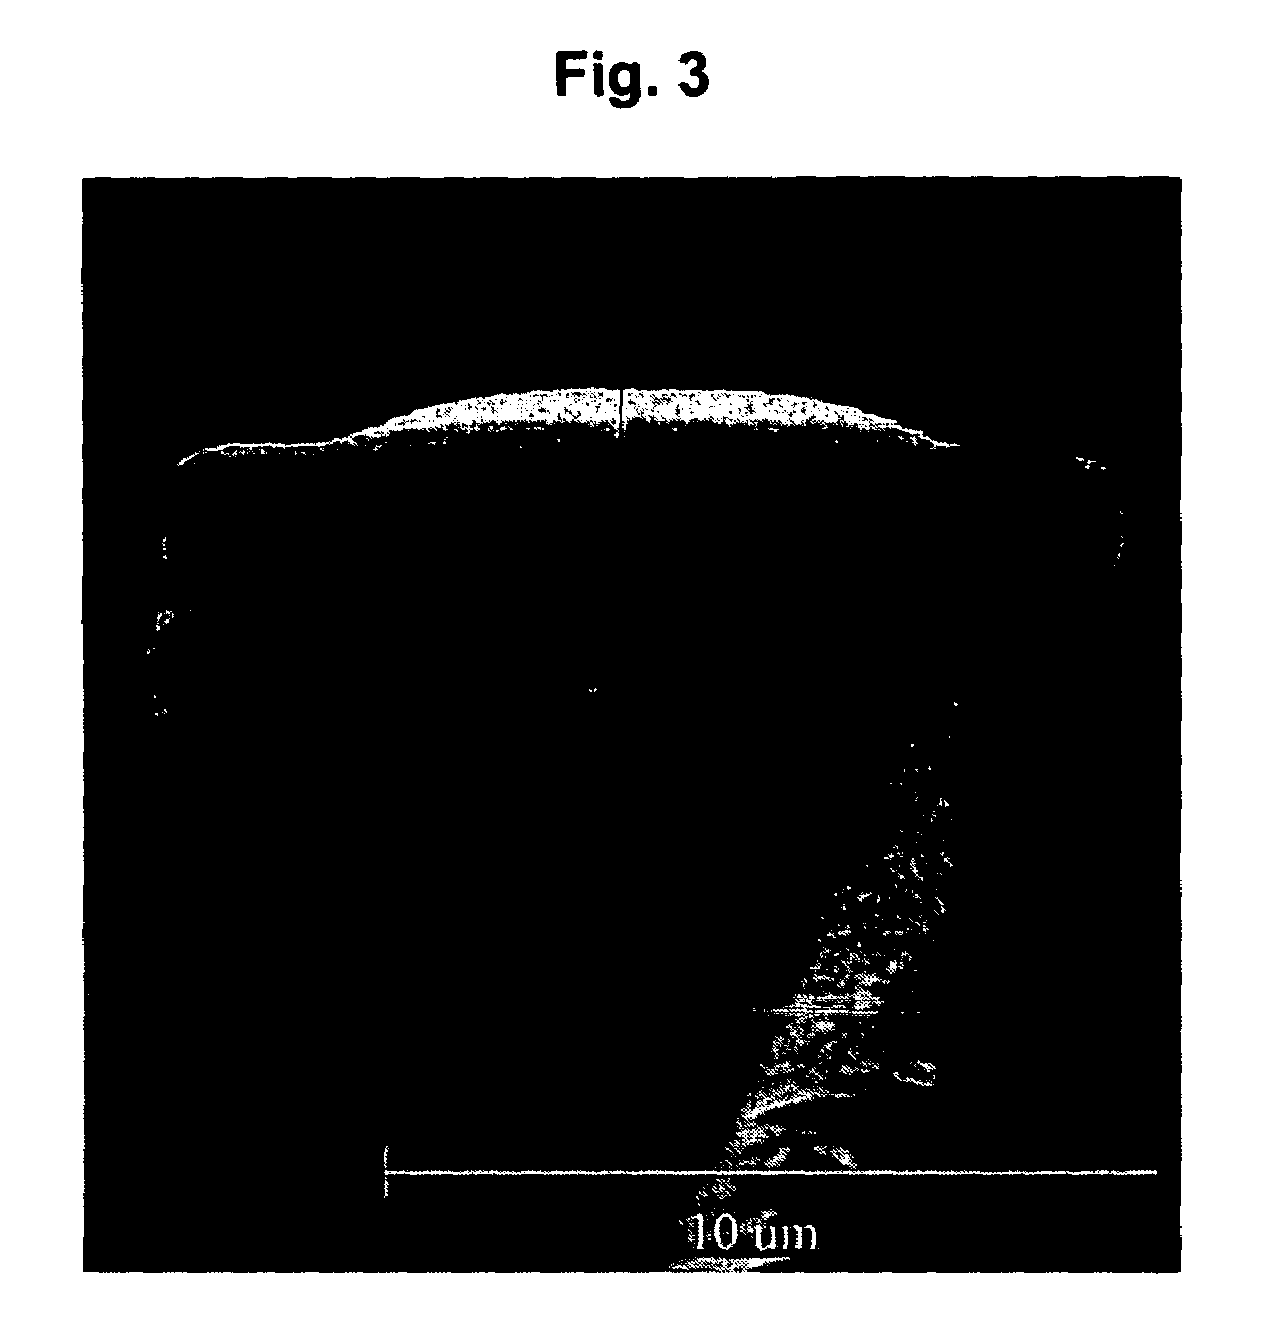 Structured self-cleaning surfaces and method of forming same